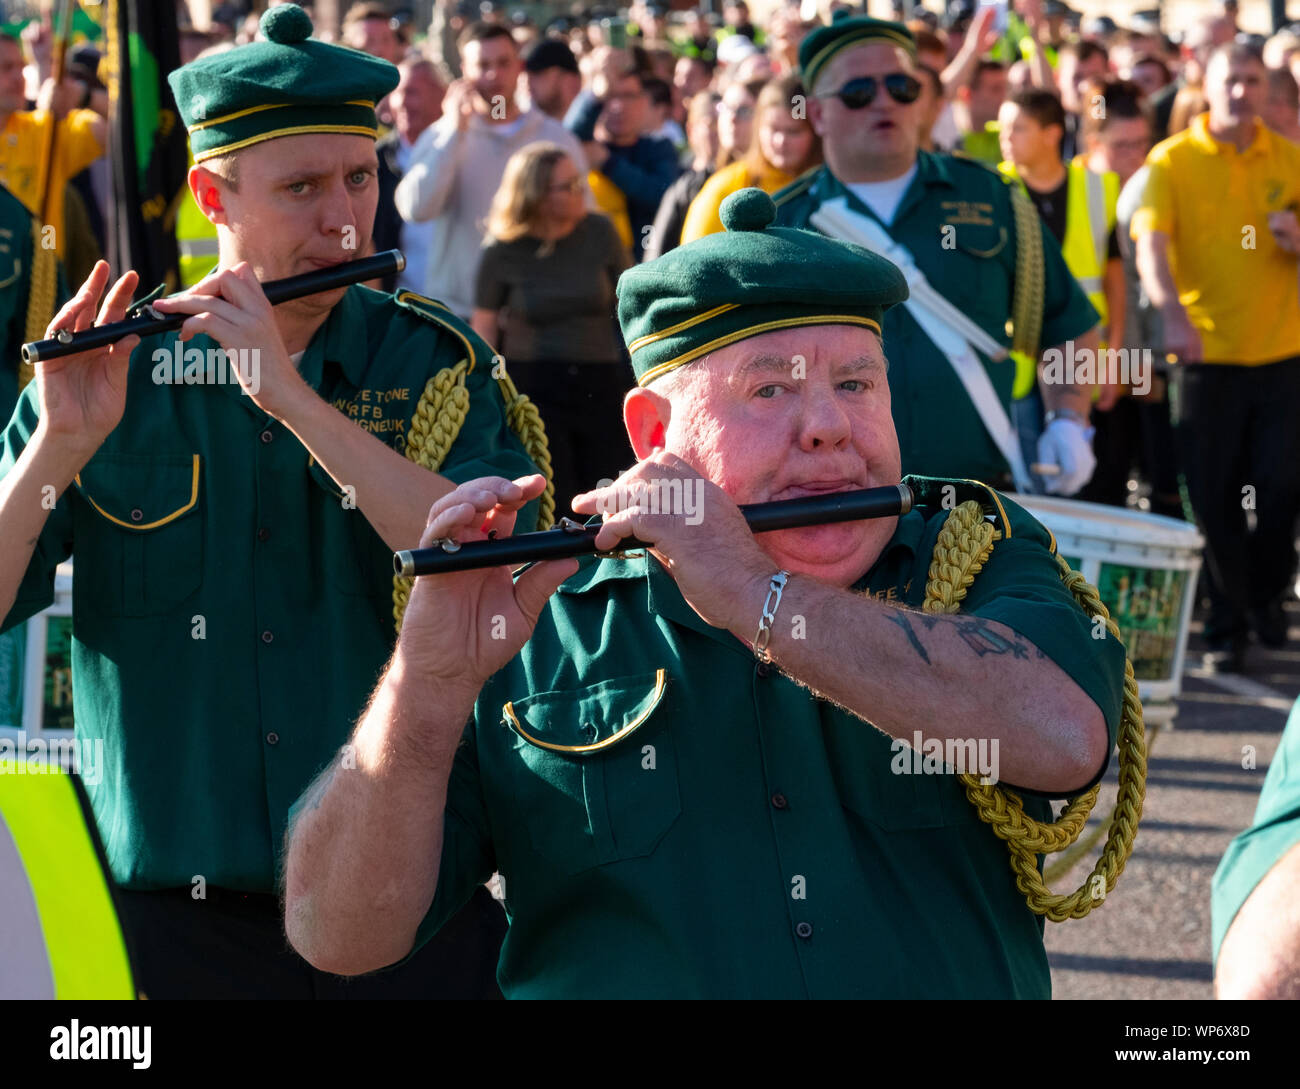 Glasgow, Scotland, UK. 7th Sep, 2019. Second controversial march in Glasgow march this time by IRPWA. The Irish Republican Prisoners Welfare Association is a dissident republican organisation which supports republican prisoners. It has ties with the political party Saoradh and the 32 County Sovereignty Movement. Credit: Iain Masterton/Alamy Live News Stock Photo